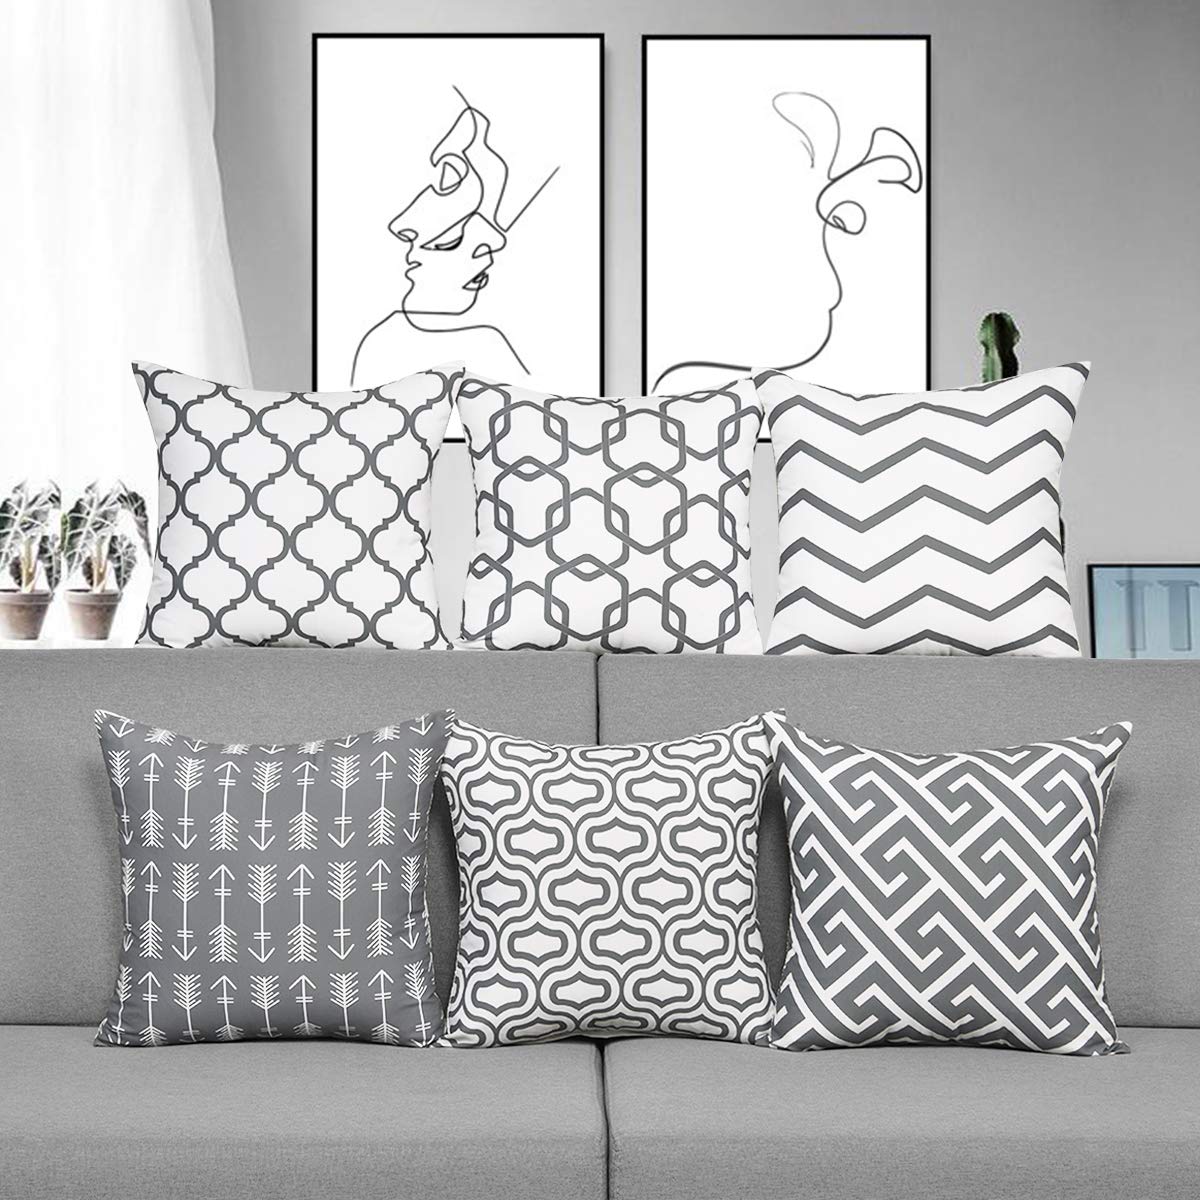 Alishomtll Cushion Covers set of 6, Pillow Cover Cushion Case, Soft Throw Pillowcase Geometric Sofa Home Decoration Pillow, Polyester 18 x 18 inch Grey